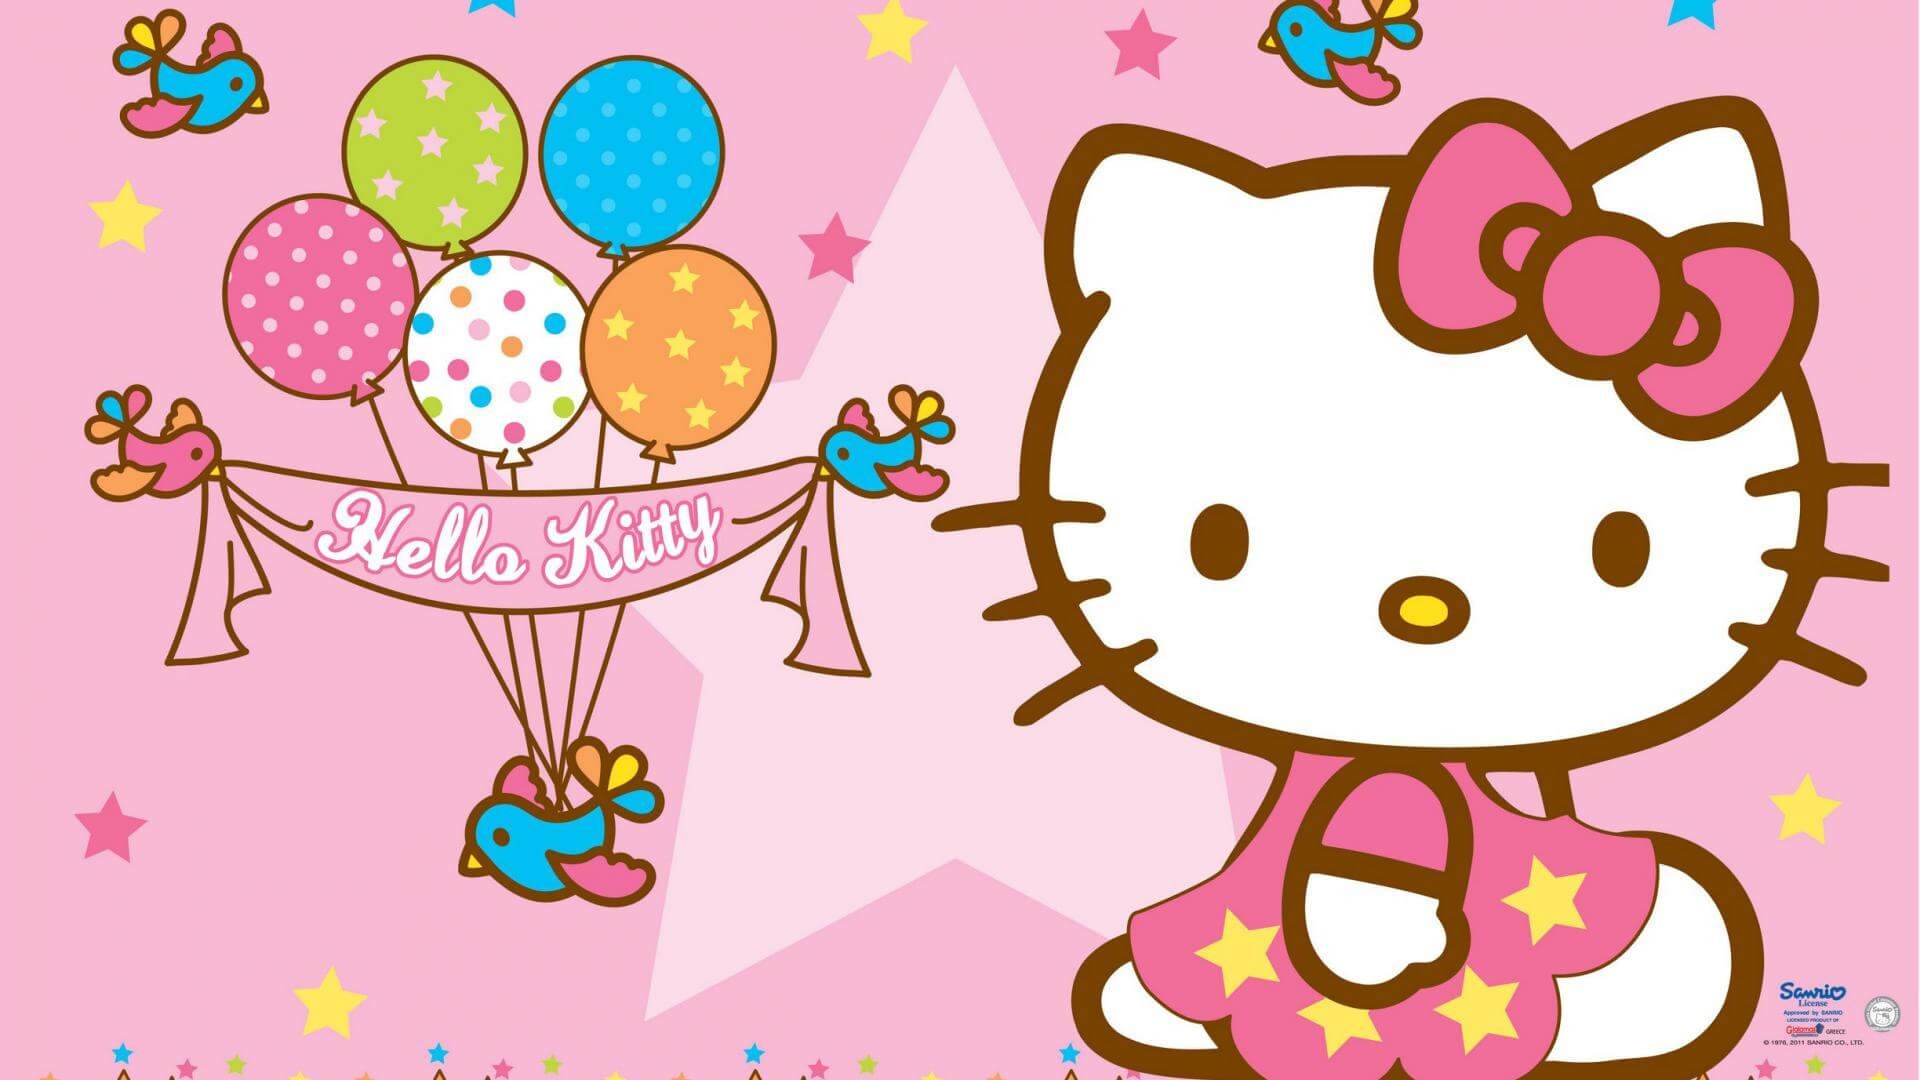 Sanrio Hello Kitty Background Wallpaper HD With Resolution 1920X1080 pixel. You can make this wallpaper for your Desktop Computer Backgrounds, Mac Wallpapers, Android Lock screen or iPhone Screensavers